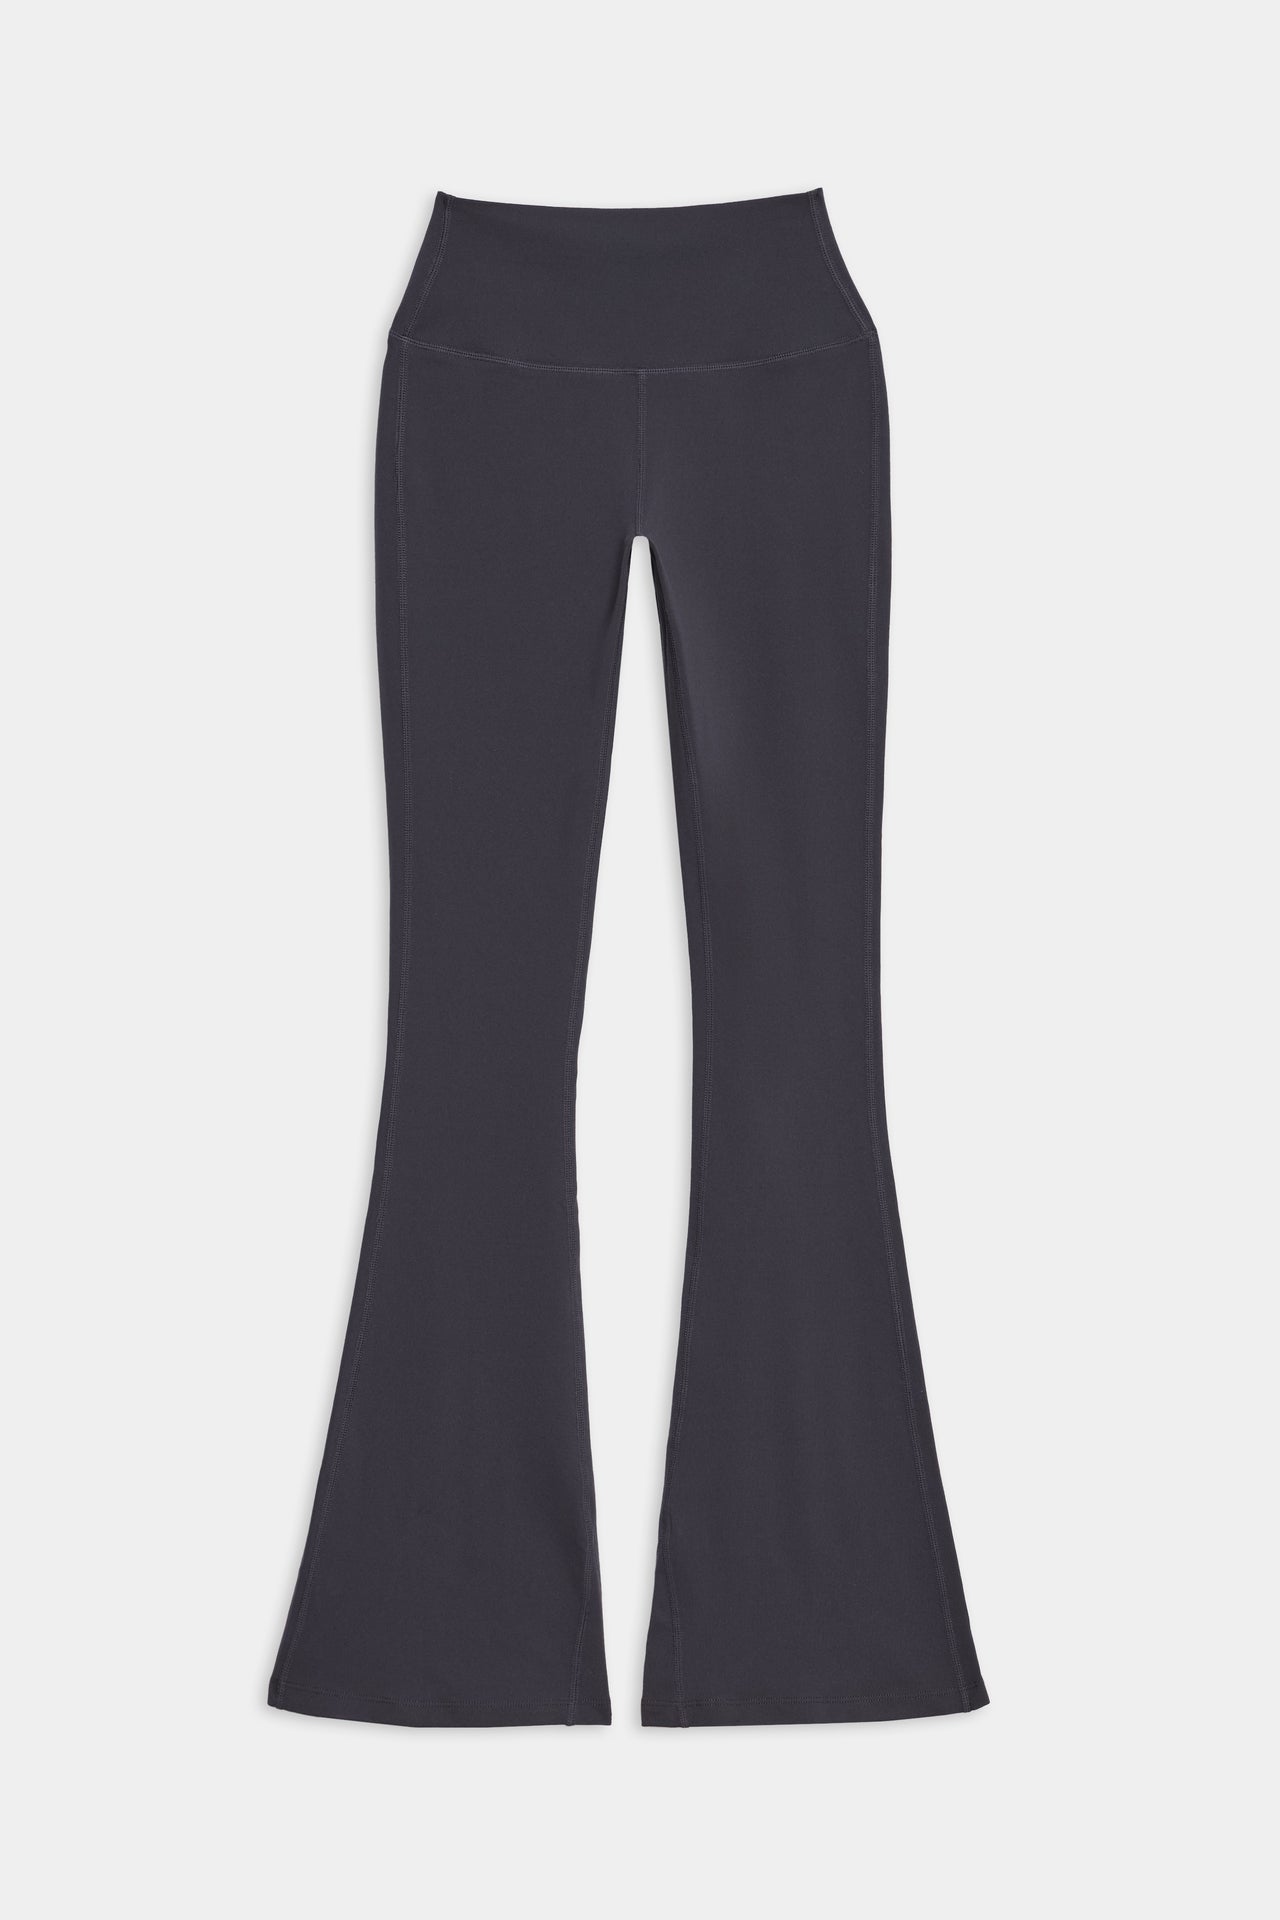 Front flat view of dark gray with dark blue tone high waist below ankle length legging with wide flared bottoms